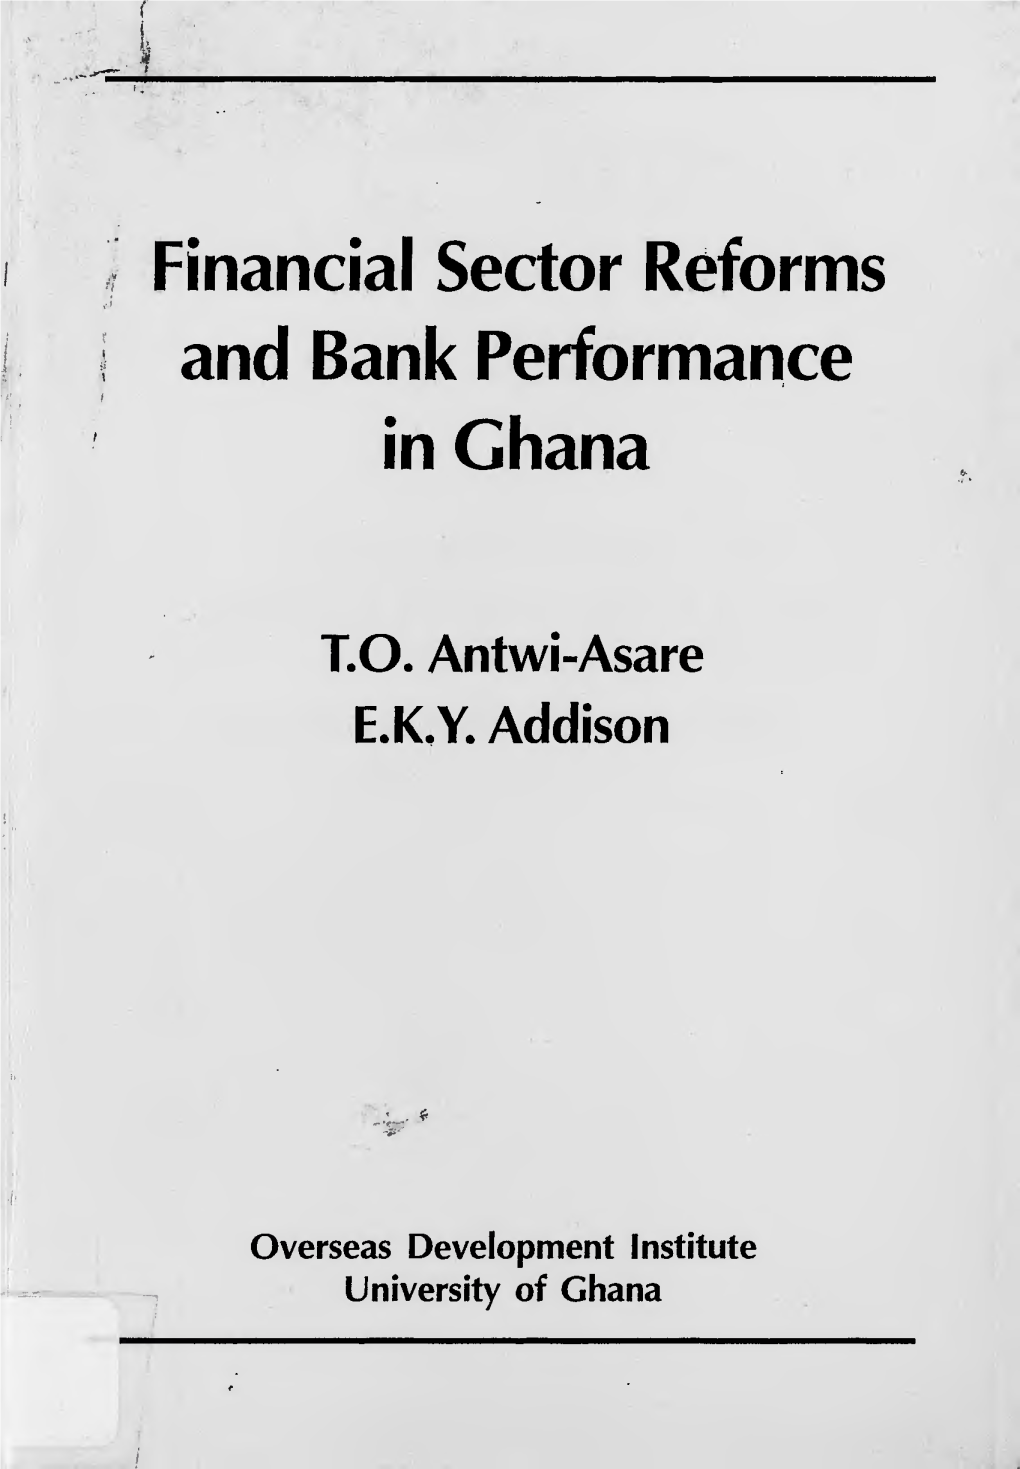 Financial Sector Reforms and Bank Performance in Ghana